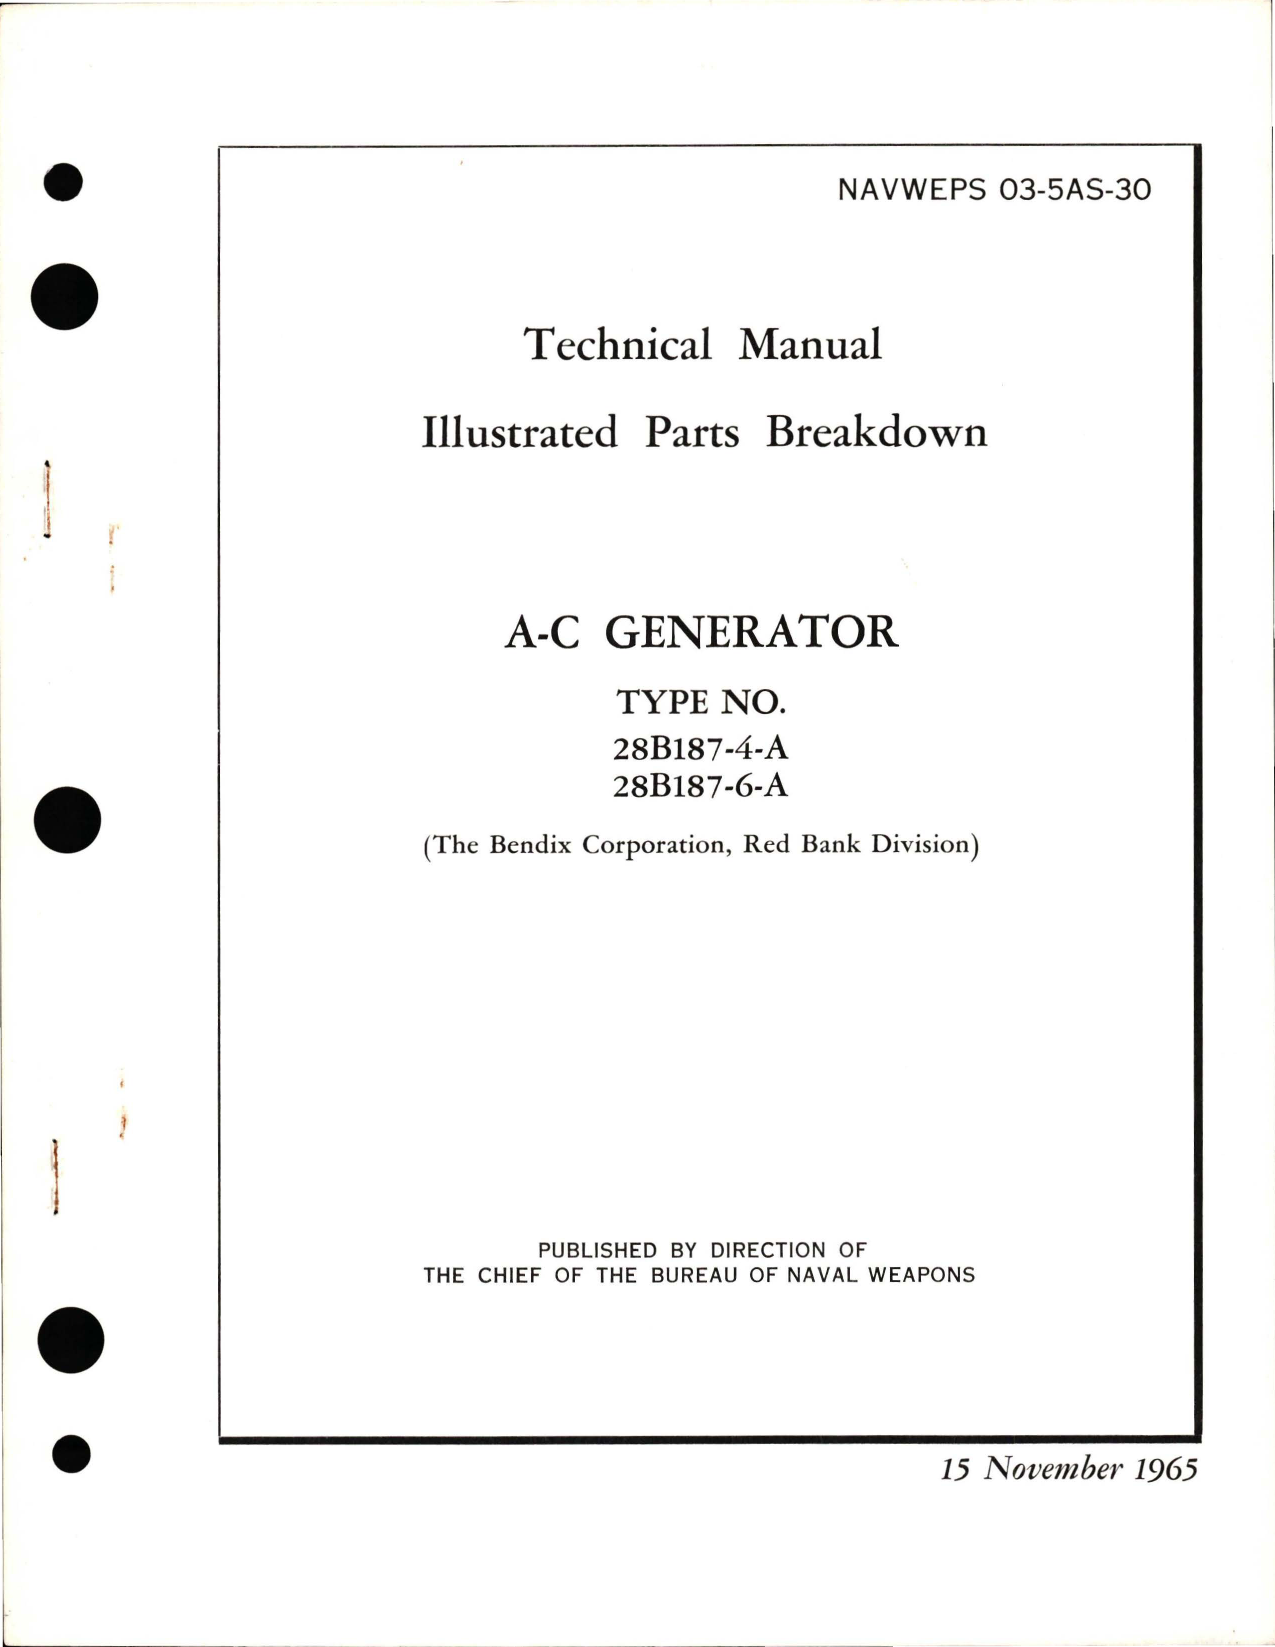 Sample page 1 from AirCorps Library document: Illustrated Parts Breakdown for A-C Generator - Types 28B187-4-A and 28B187-6-A